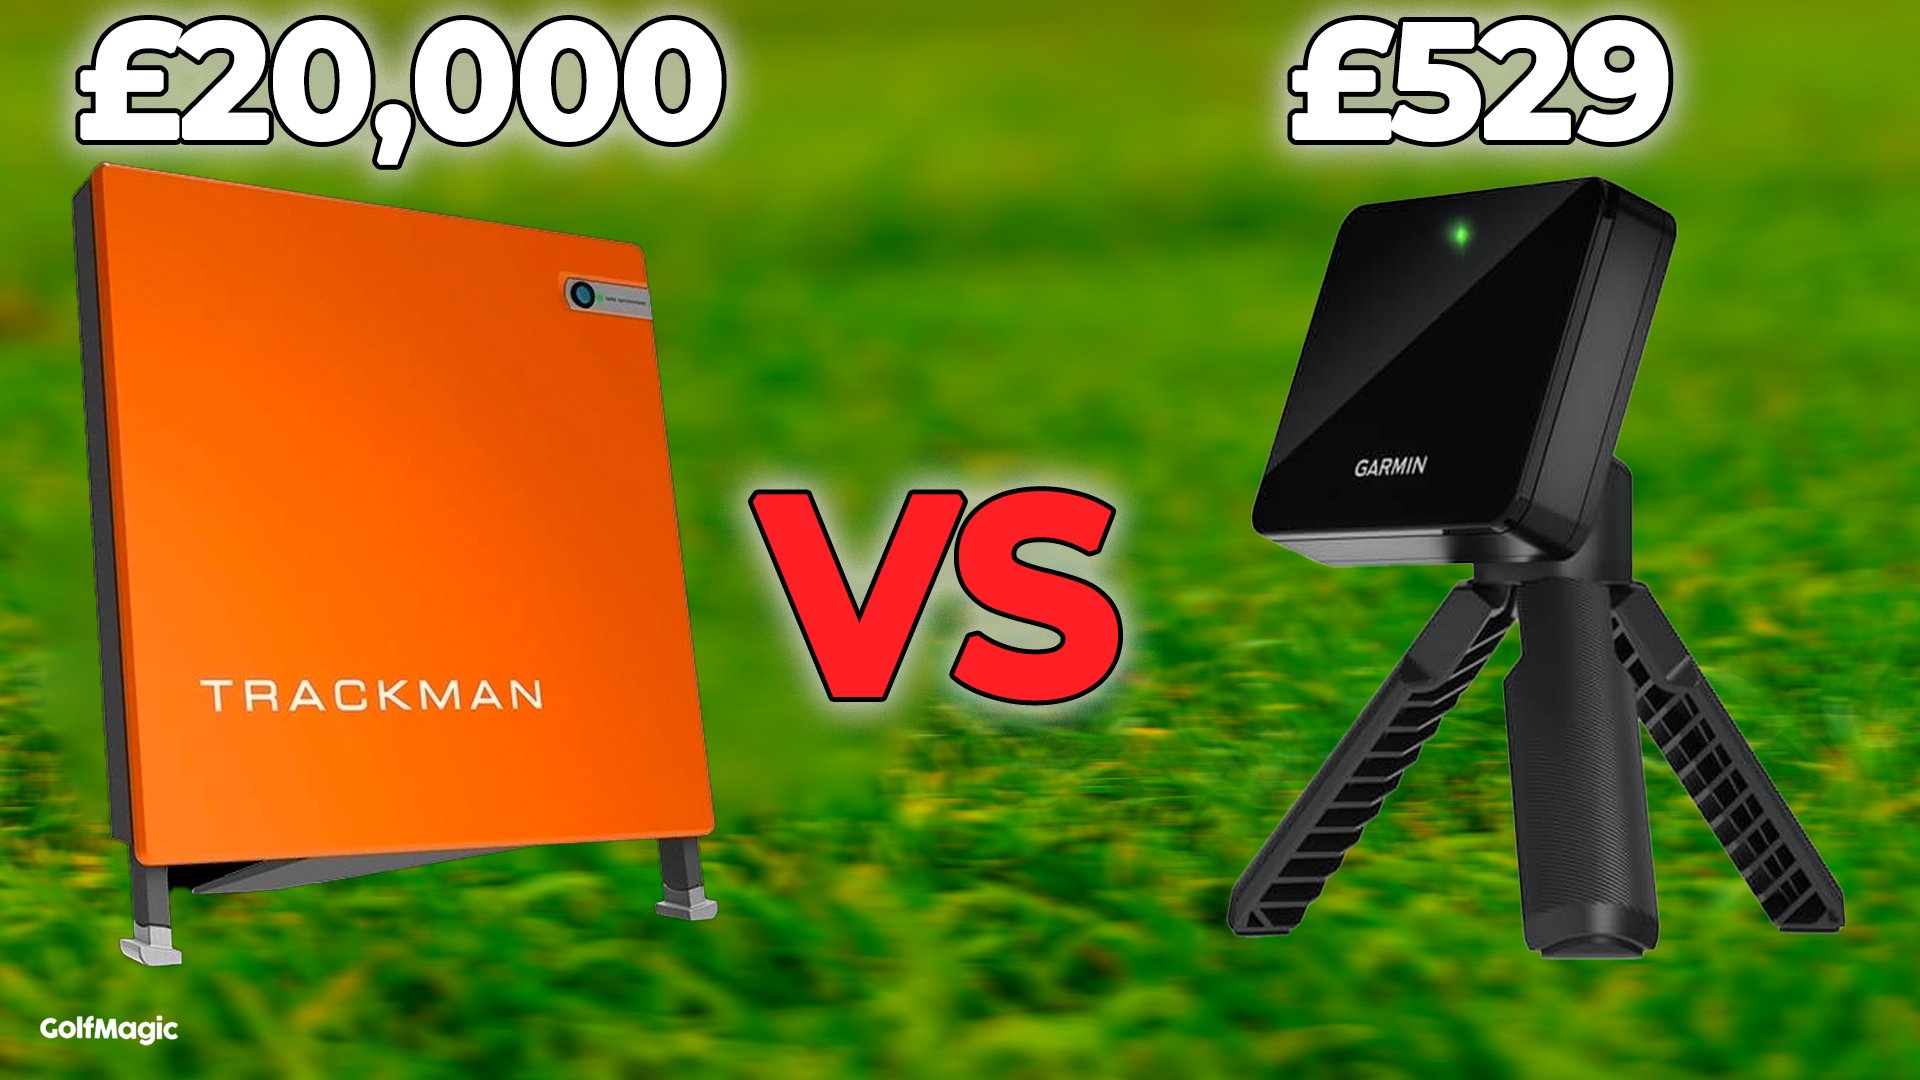 Garmin R10 vs Trackman - Who will win the INDOOR ACCURACY TEST